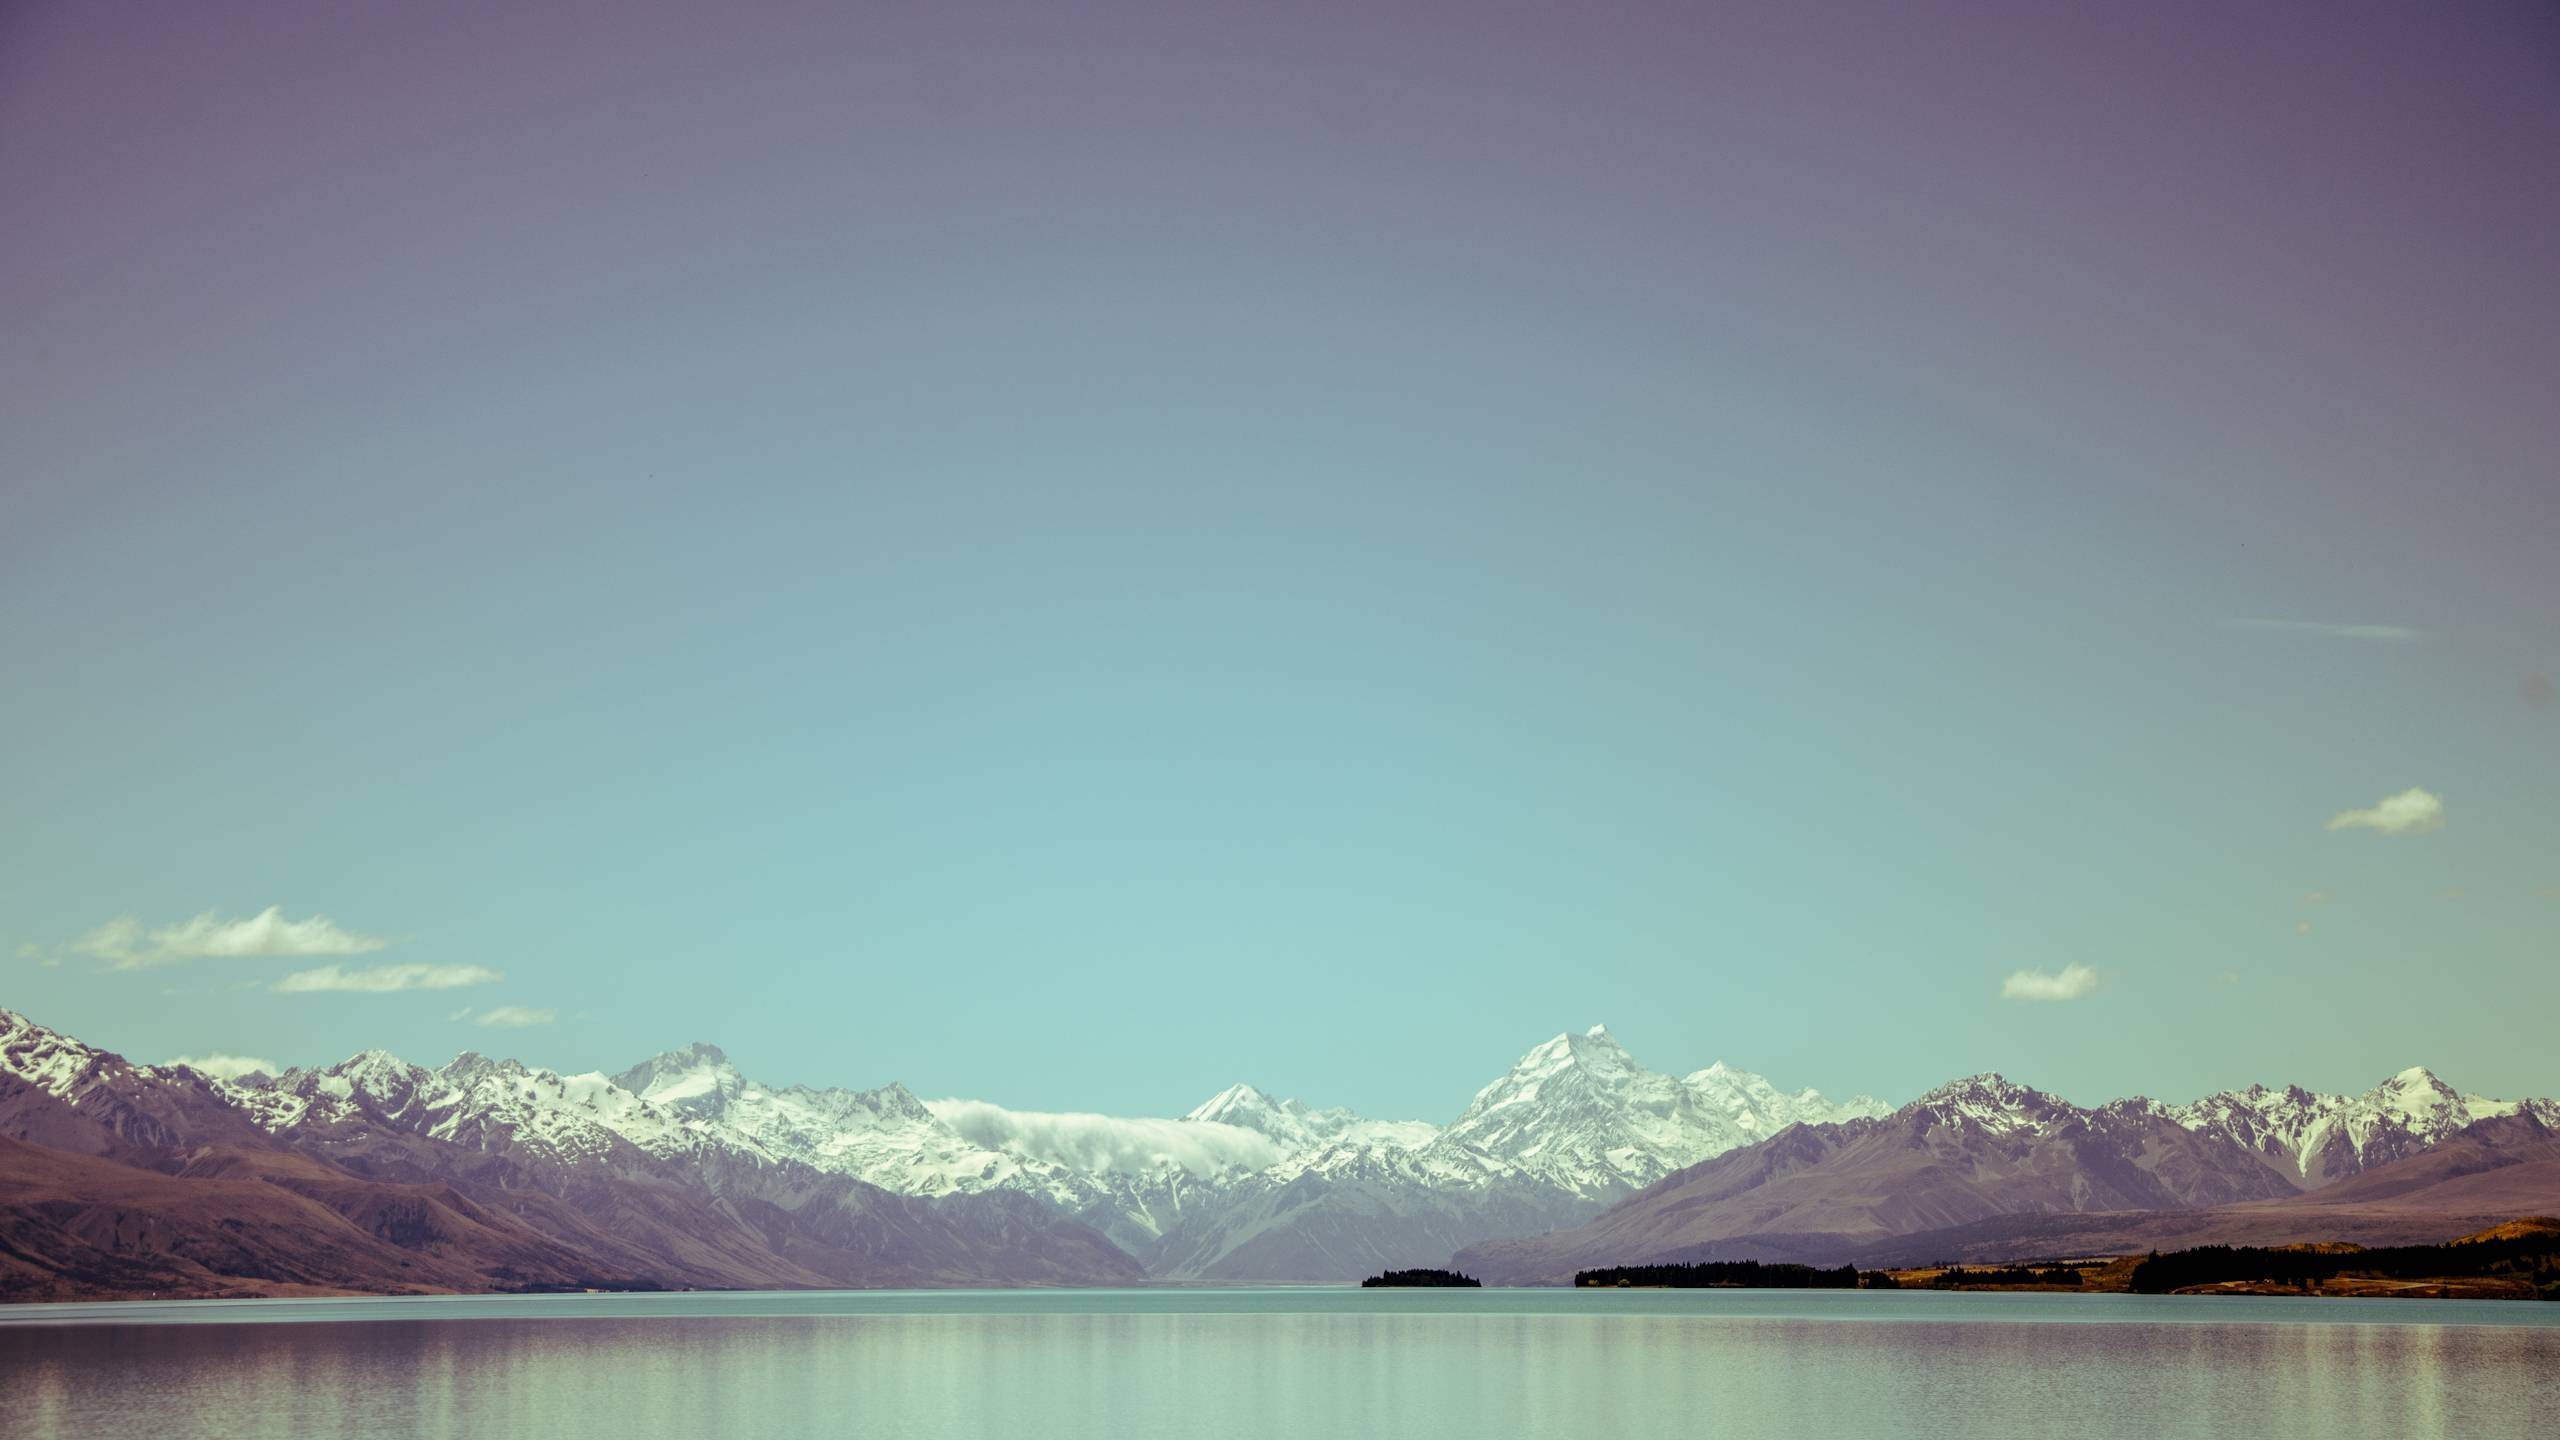 General 2560x1440 mountains landscape sky water lake nature clear sky